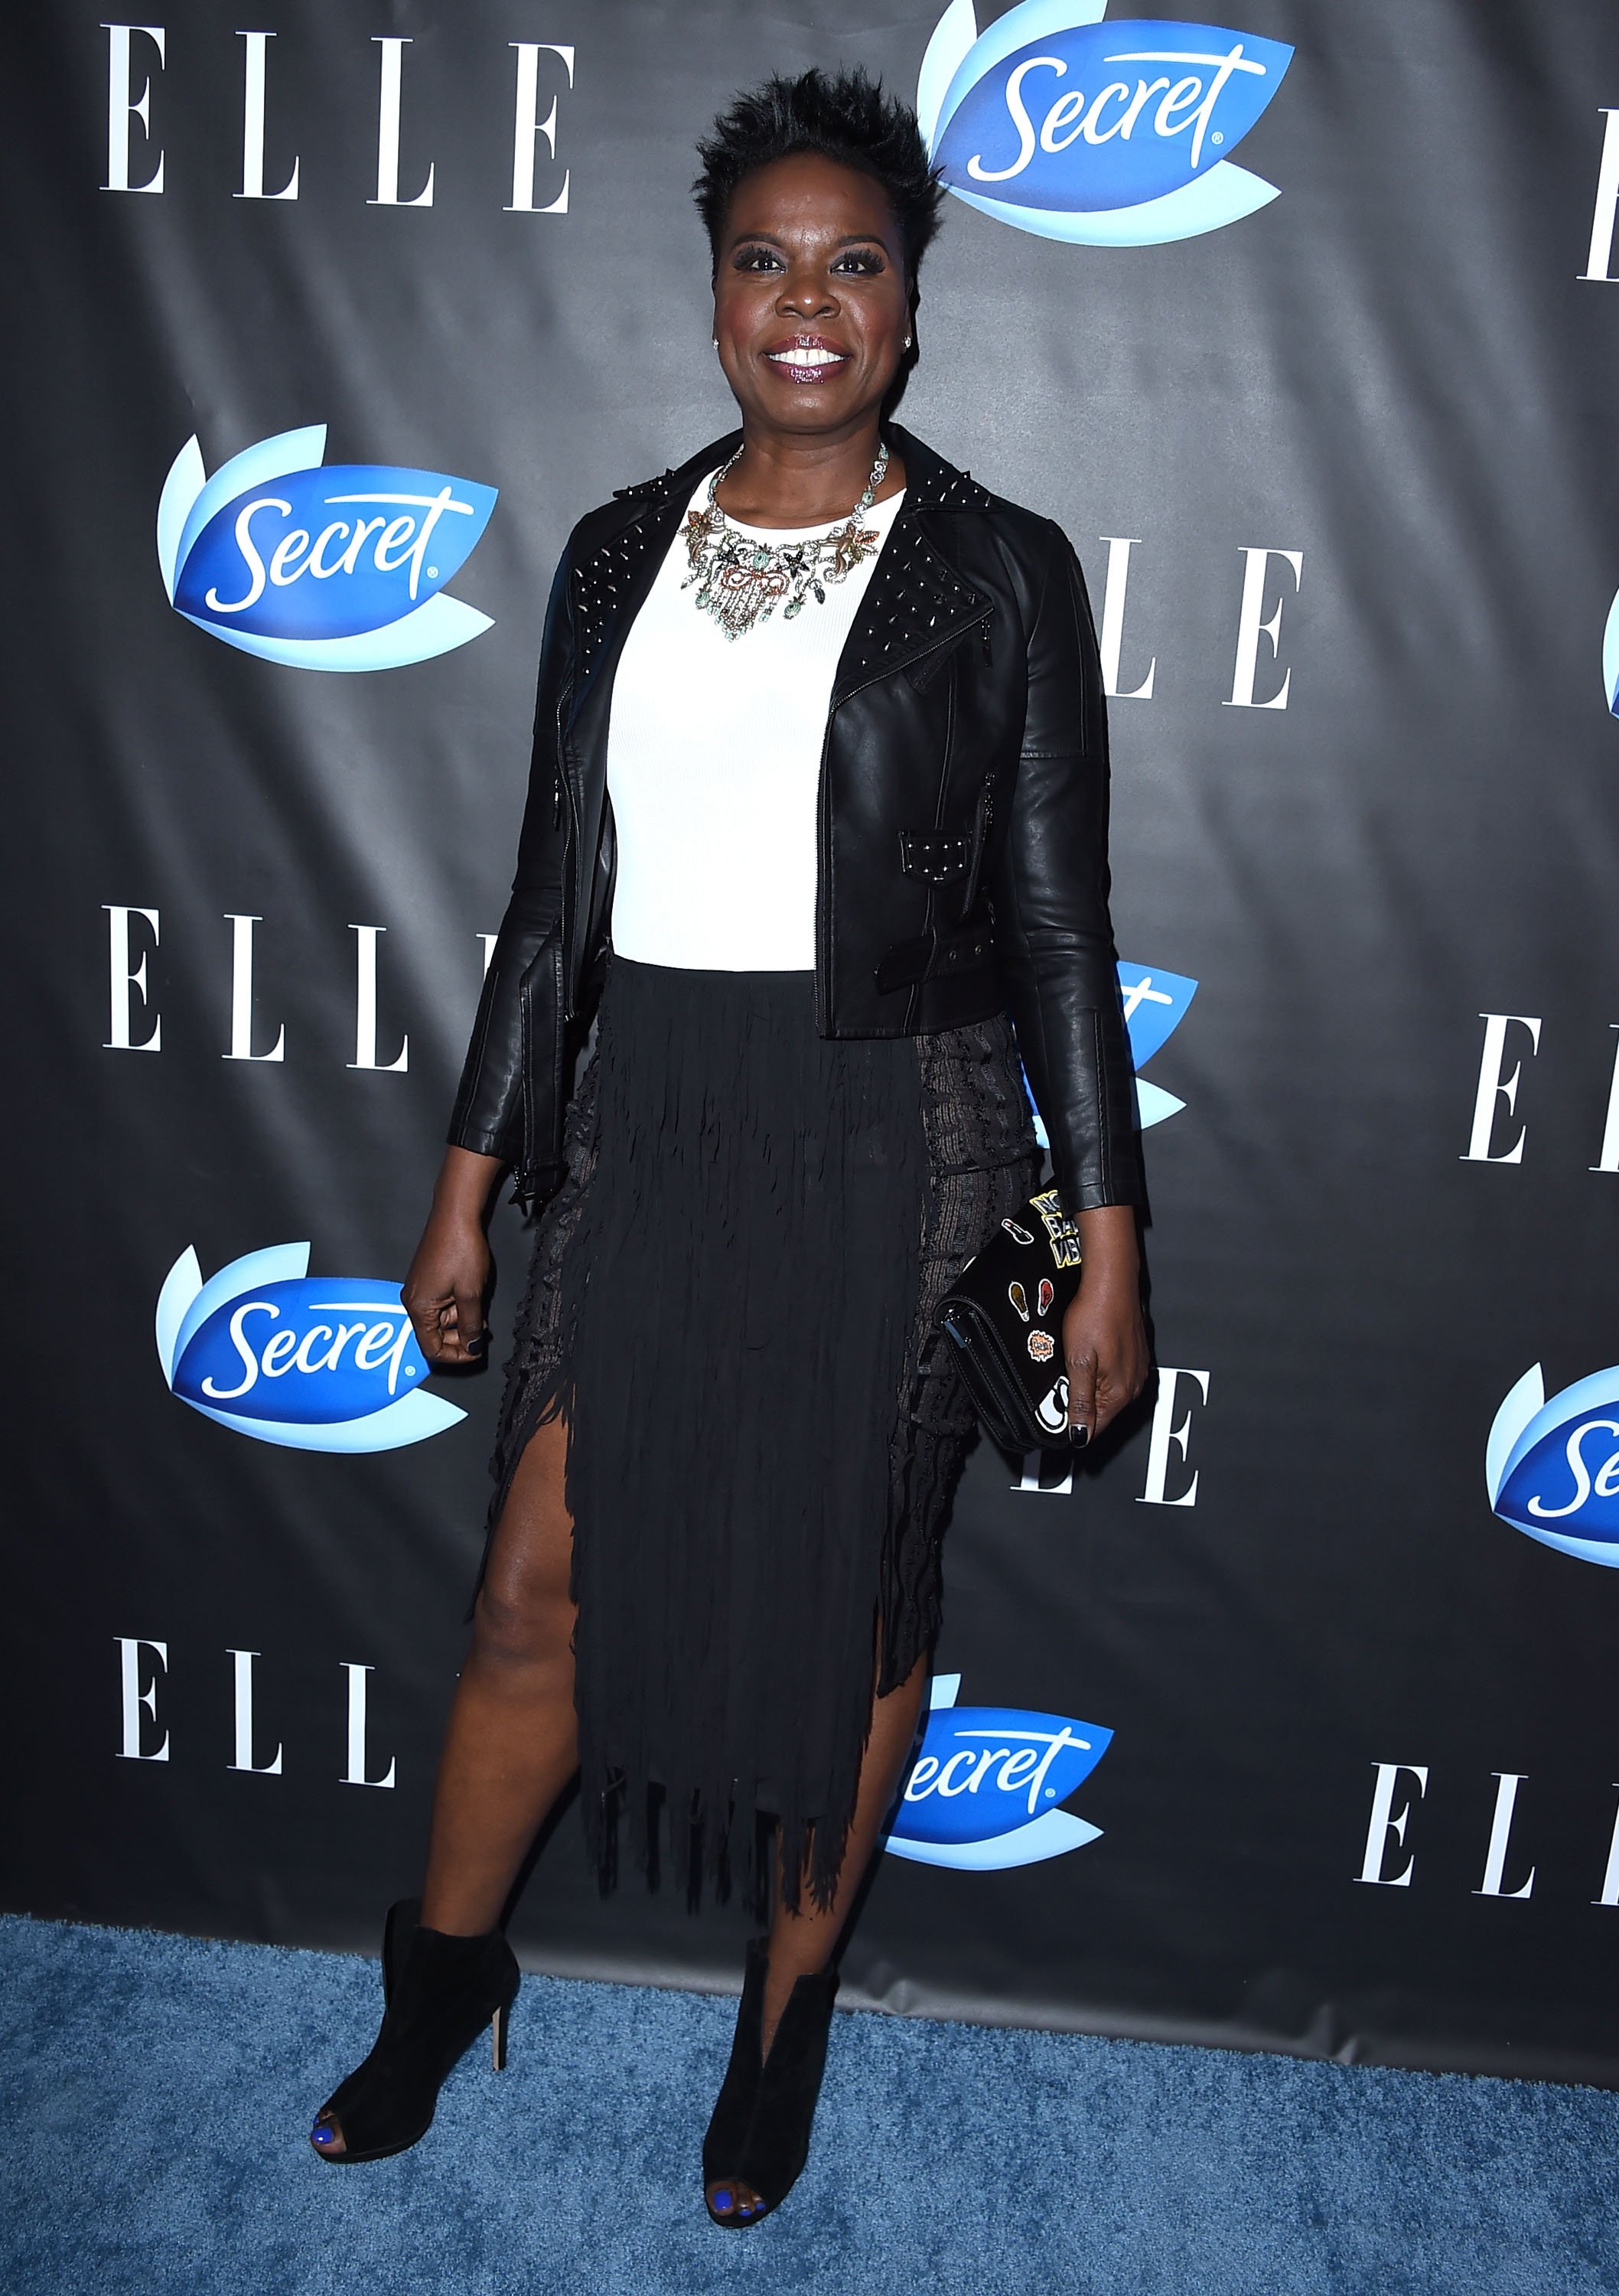 Leslie Jones at the ELLE Hosts Women In Comedy Event on June 7, 2016, in California | Source: Getty Images